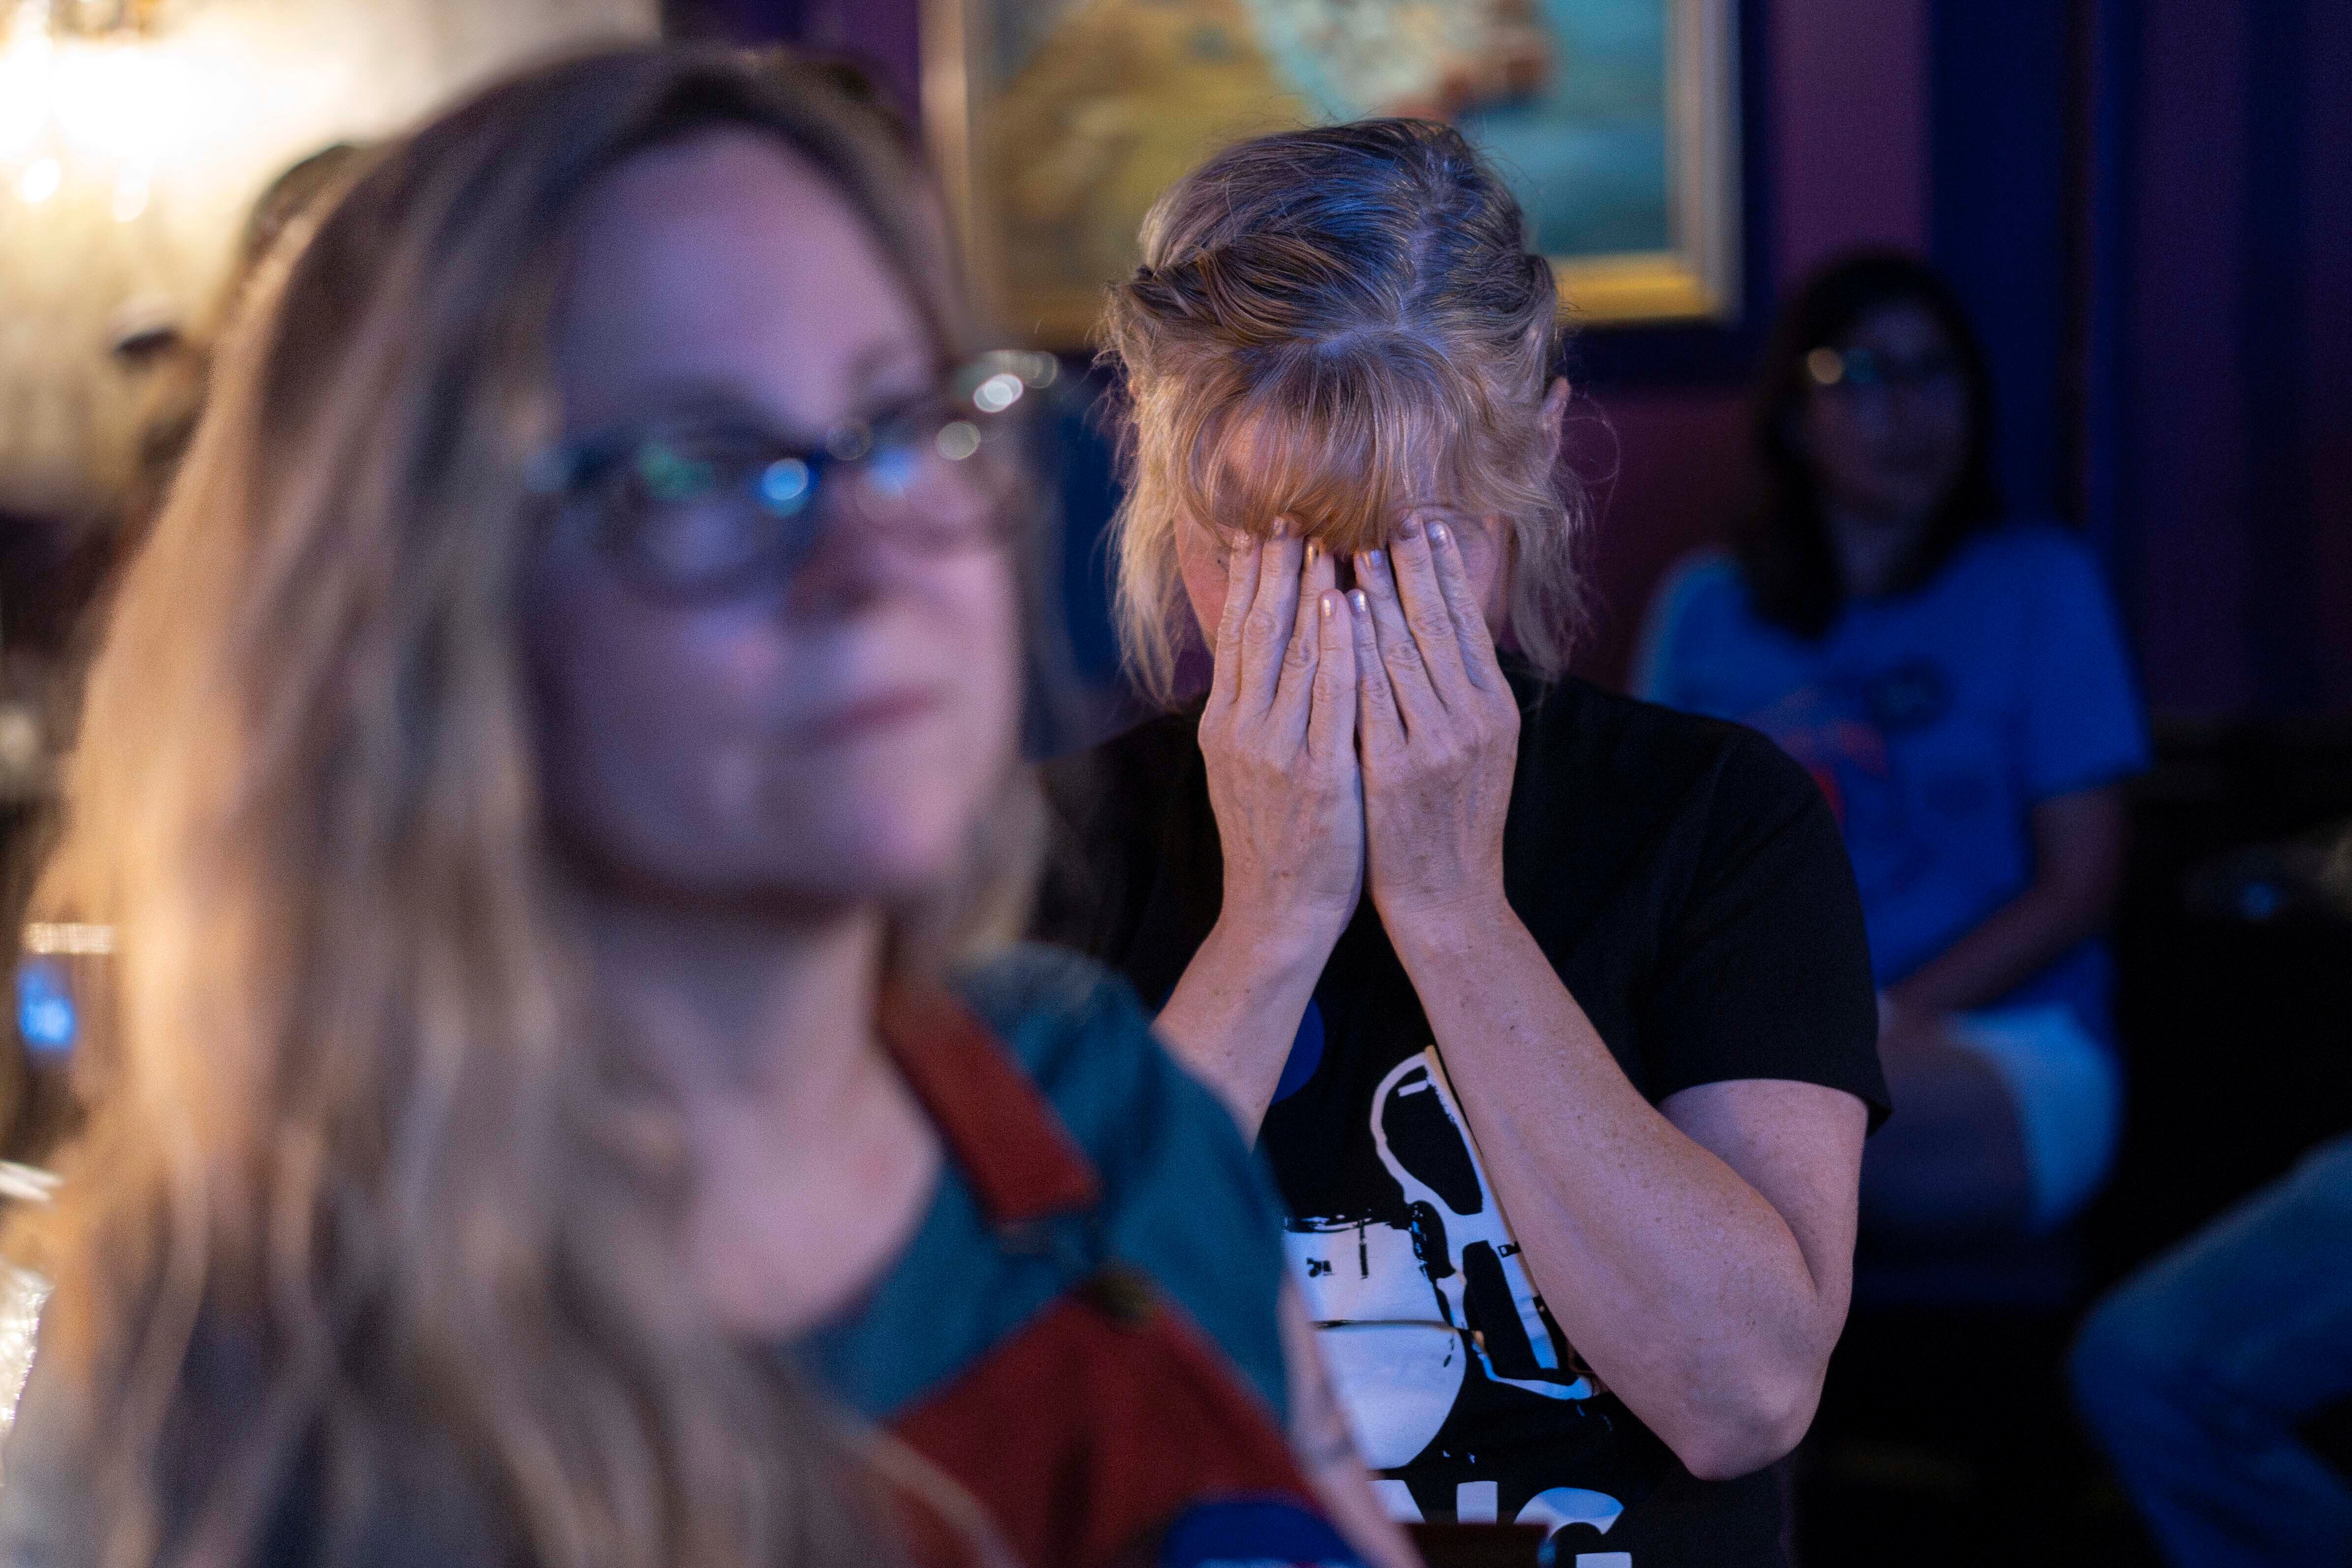 Tonya Morris, from Cincinnati, reacts during the presidential debate between Joe Biden and Donald Trump on June 27. The face-off was widely seen as a disastrous moment for the Biden campaign